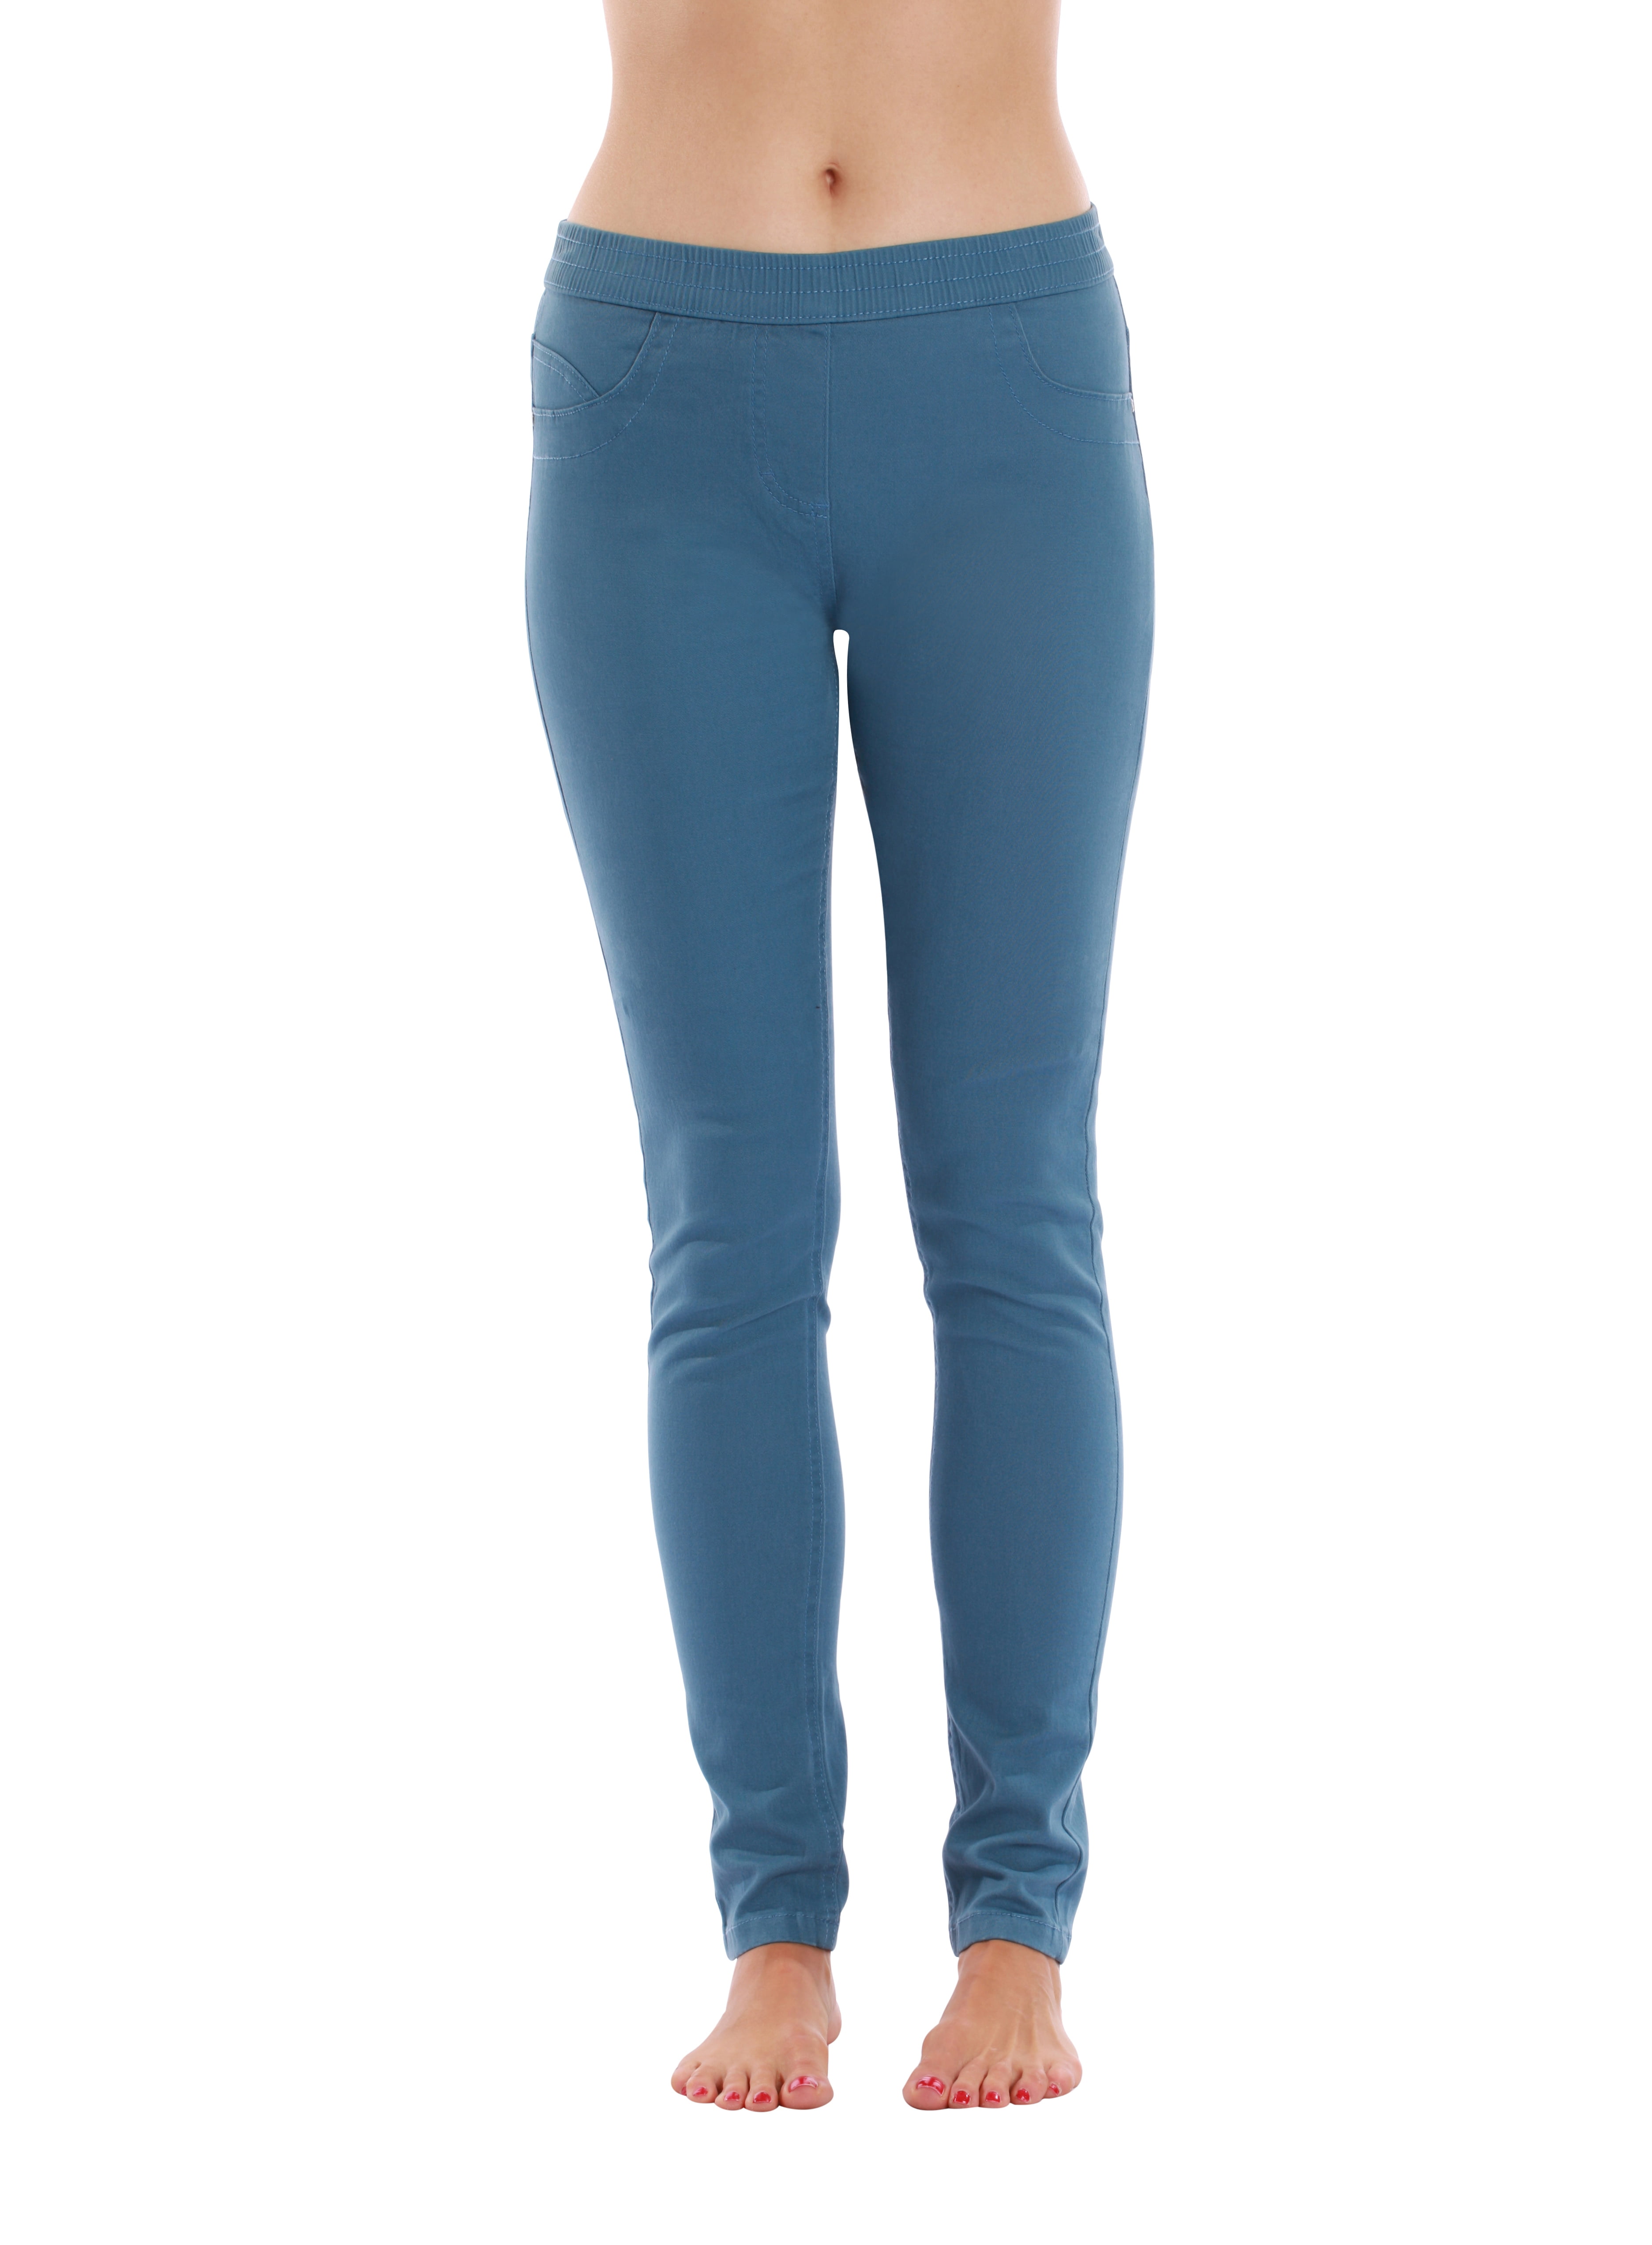 Just Love Solid Jeggings for Women (Light Blue Stretch, X-Large